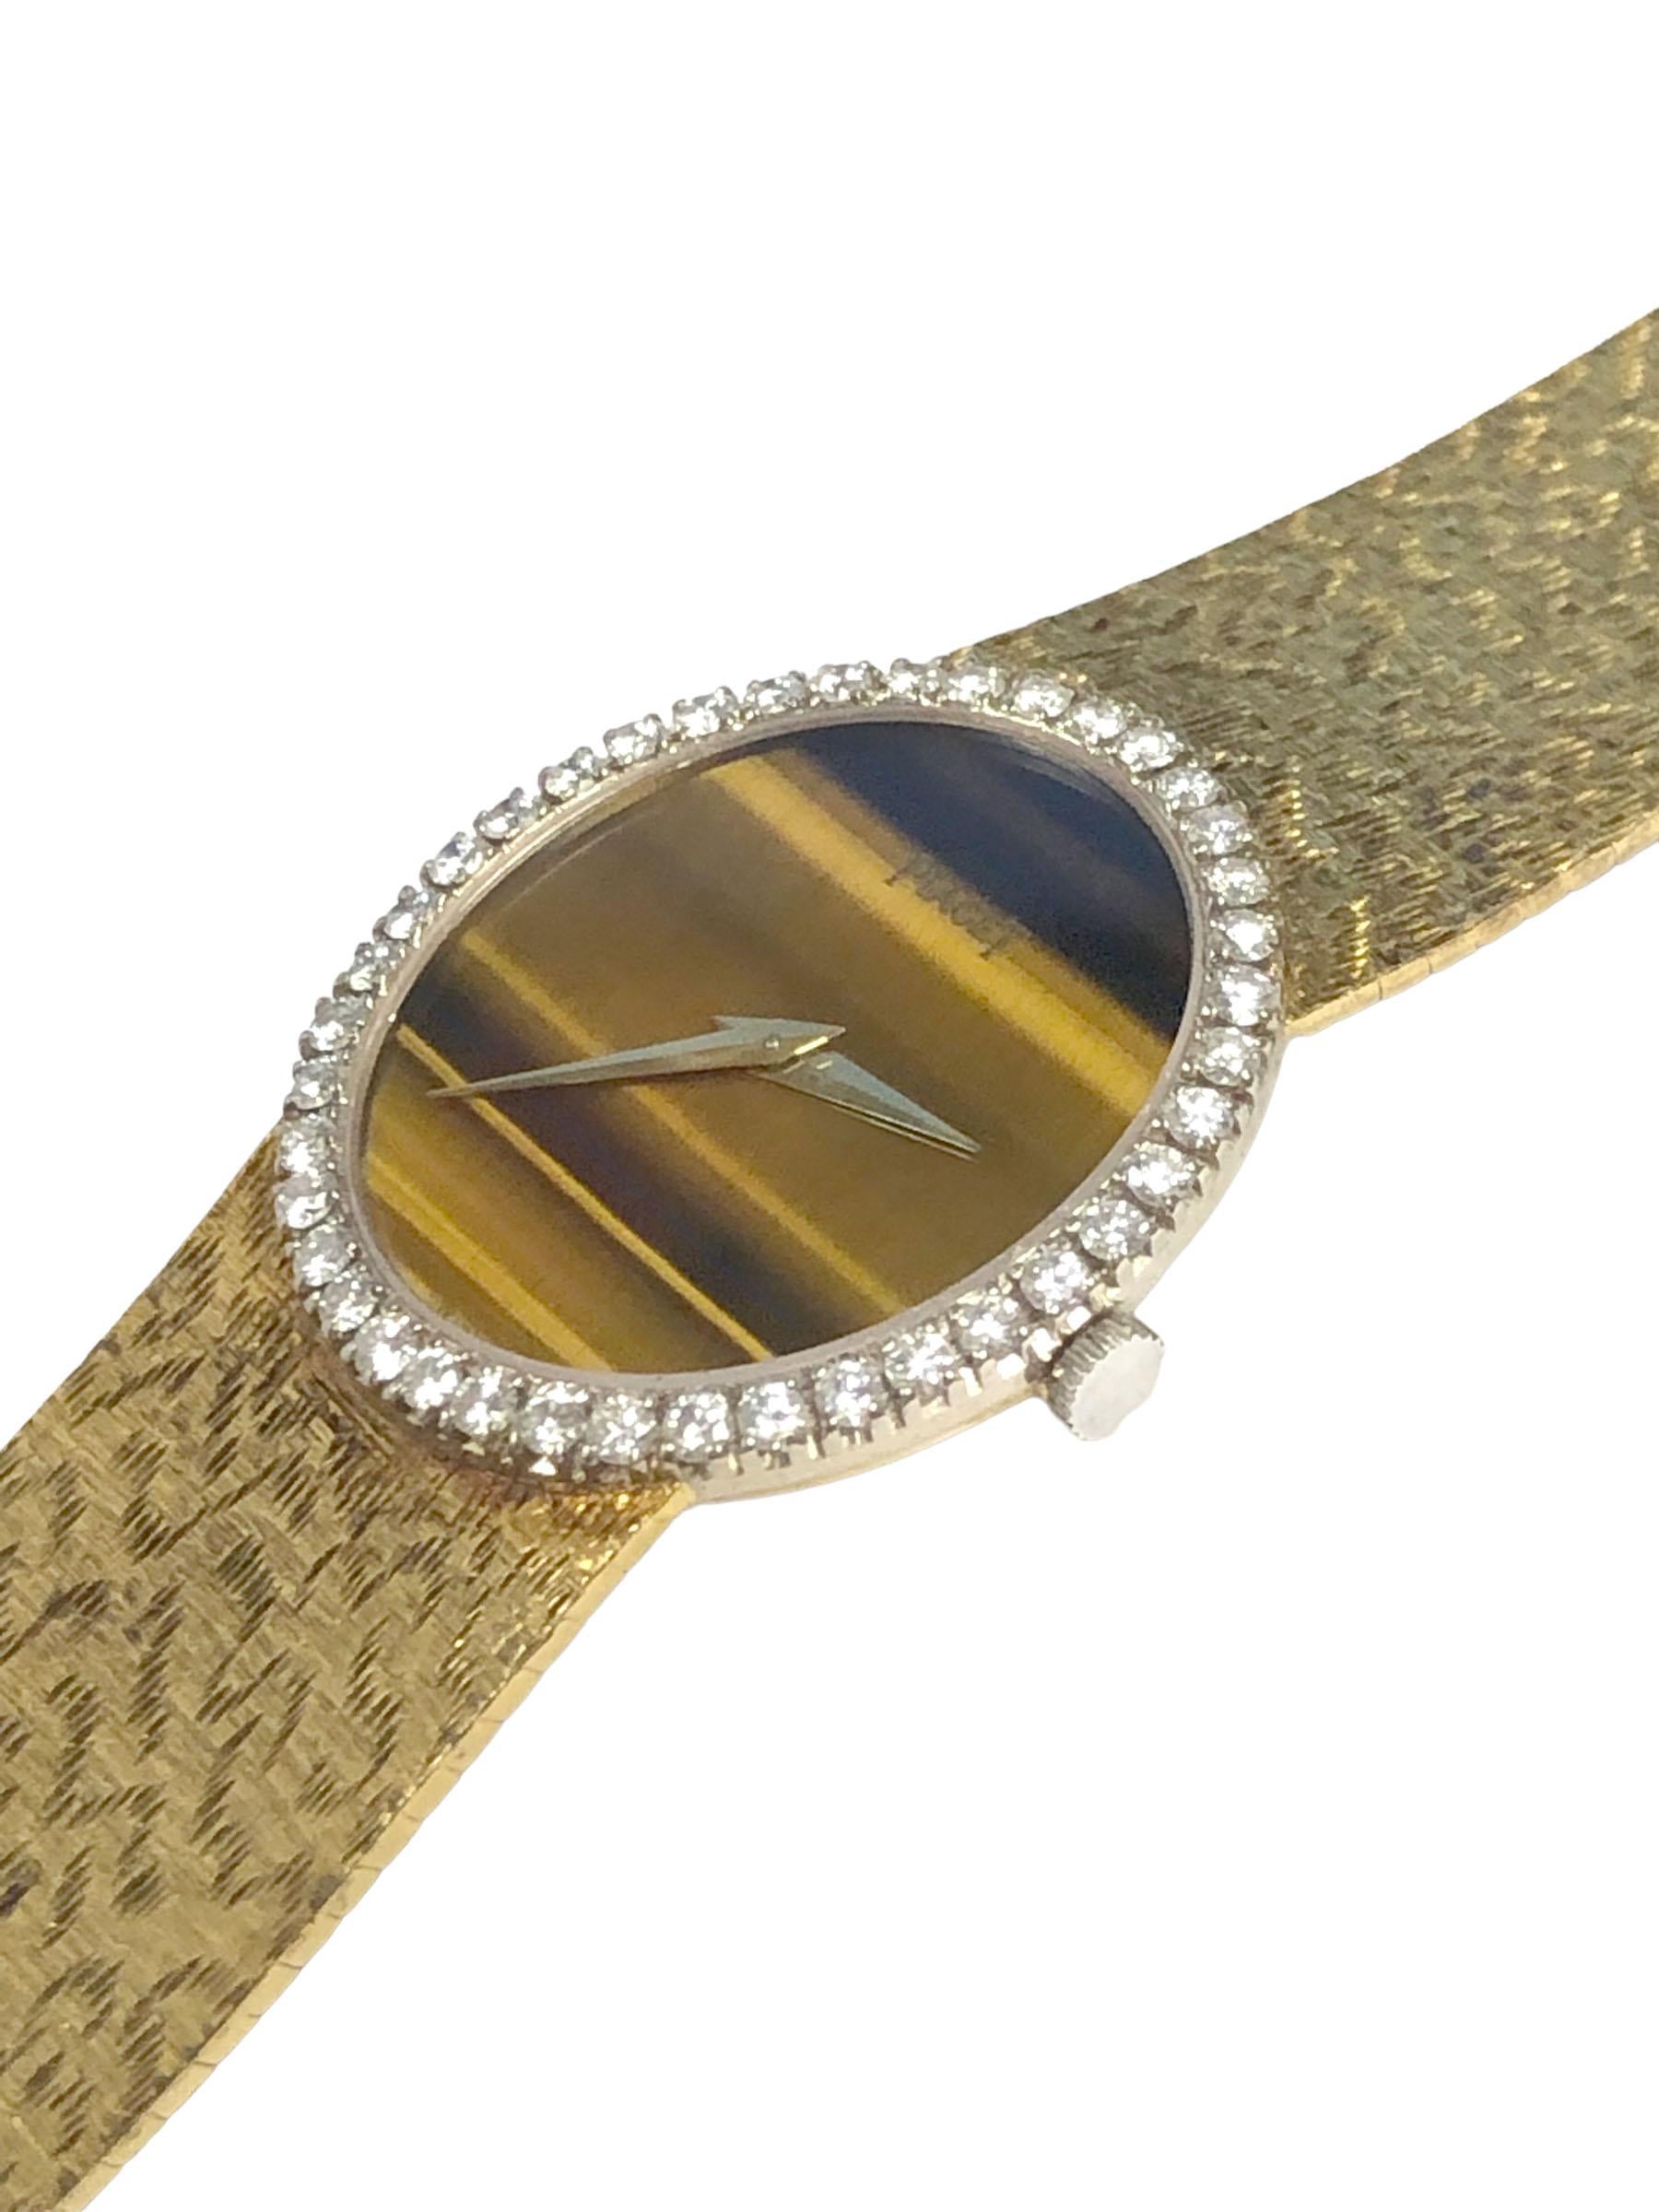 Circa 1970s Piaget Ladies Wrist Watch, 27 X 24 M.M. 18k Yellow Gold 2 piece case, White Gold Bezel with Round Brilliant cut Diamonds totaling 1 Carat. 17 Jewel mechanical, manual wind movement, Tiger Eye Dial. Textured integrated bracelet, watch